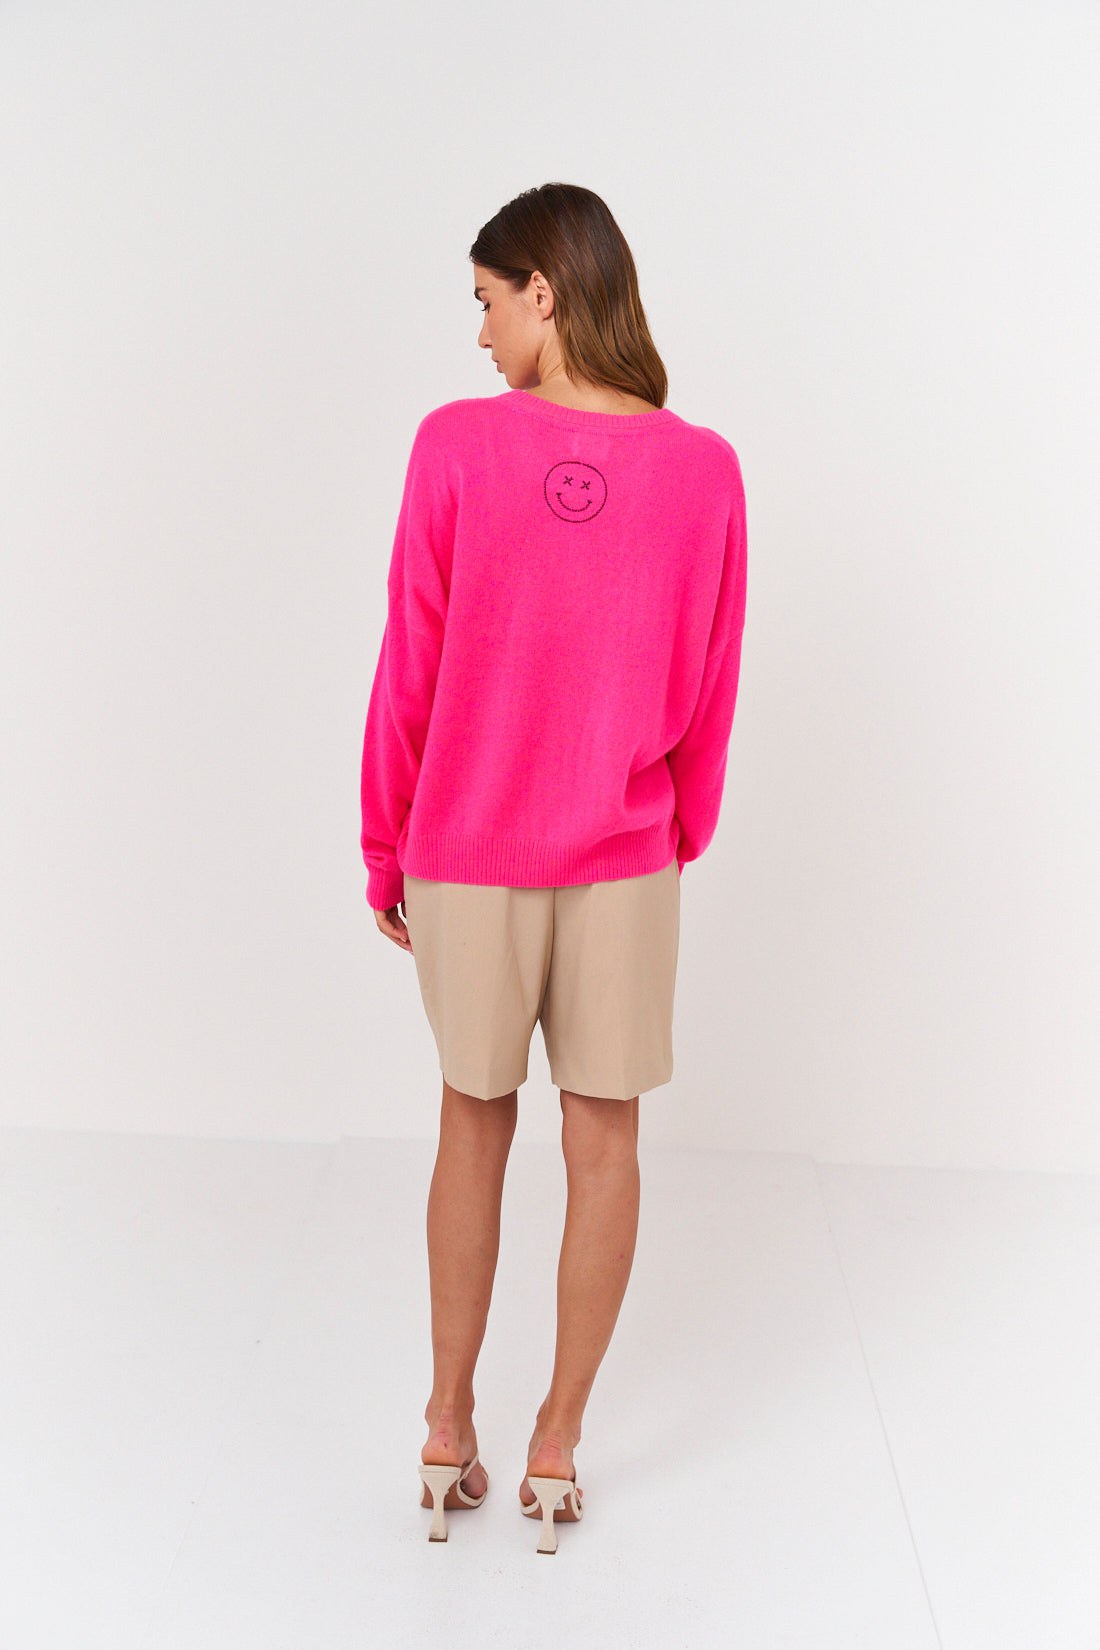 Smiley Stitch Crewneck Sweater Pink/Black, Sweater by Brodie Cashmere | LIT Boutique